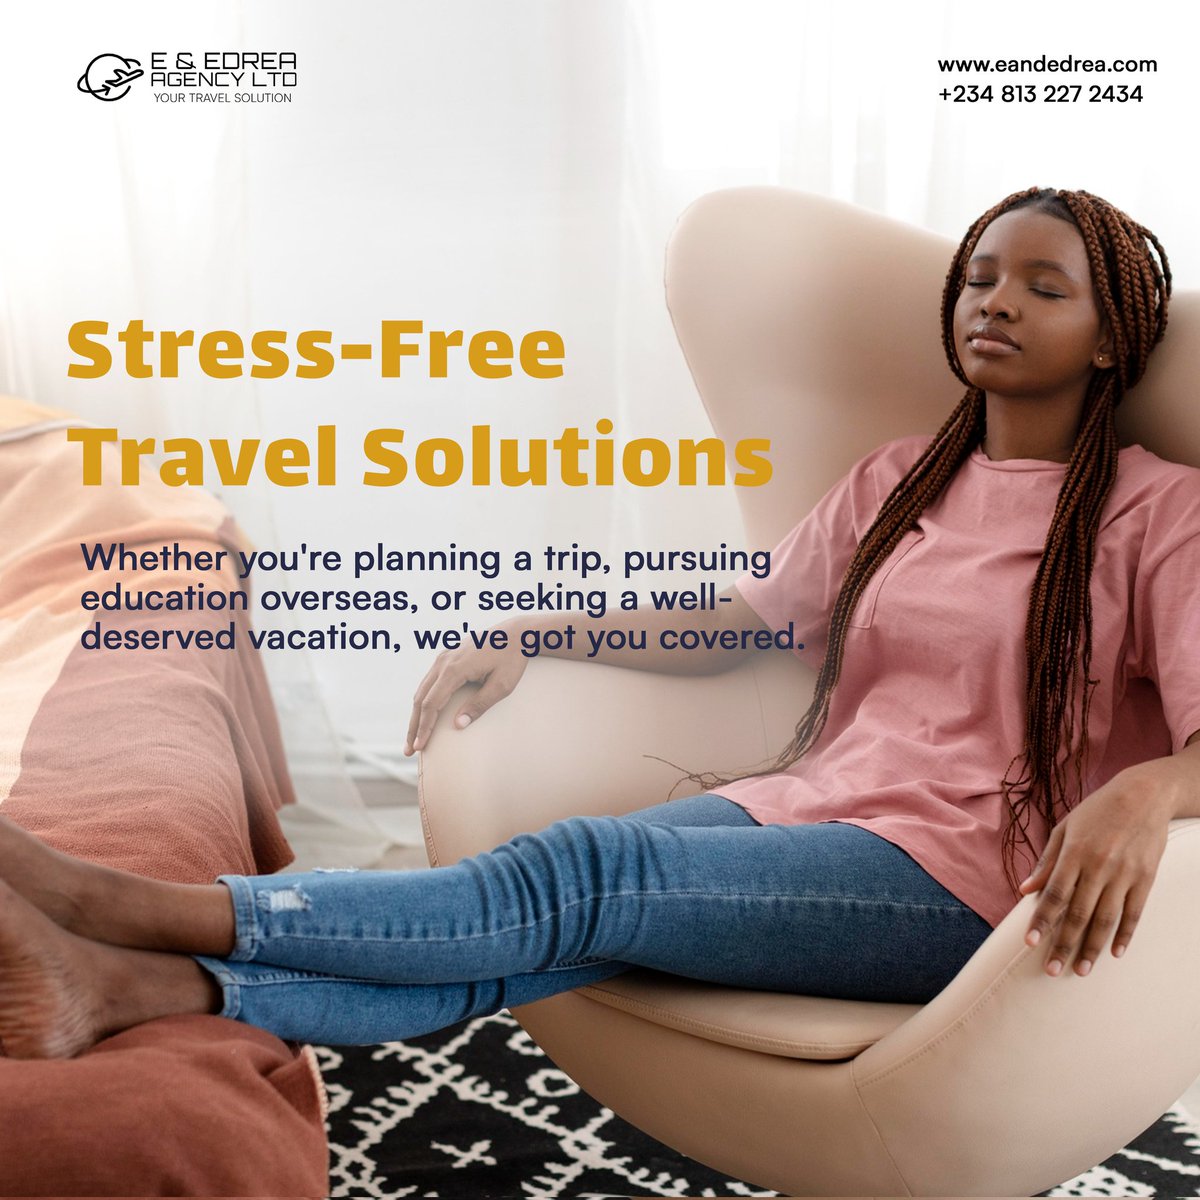 Travel with Peace of Mind! ✈️🌍 Leave the planning to us and enjoy a stress-free journey.  #TravelWithEase #StressFreeJourney #YourTravelPartner #TravelWithConfidence #LeaveItToUs #TravelSolution #DreamDestination #GlobalExploration #TravelSupport #TravelPeacefully #TravelExperts